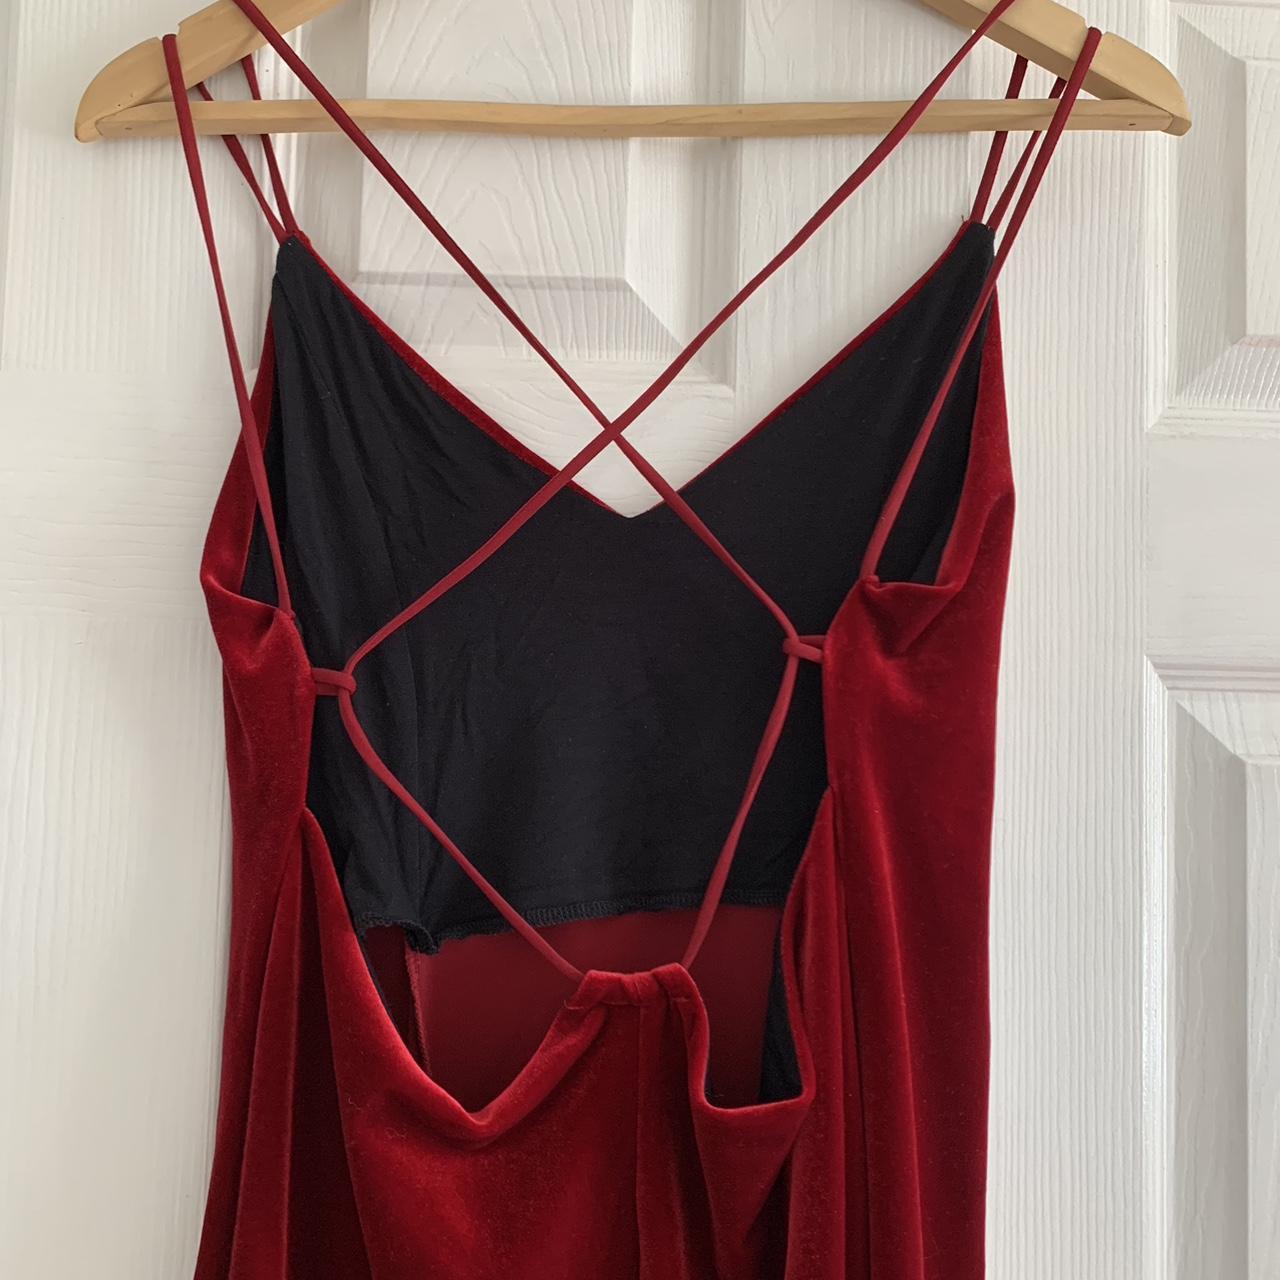 Urban Outfitters Women's Red and Burgundy Dress | Depop